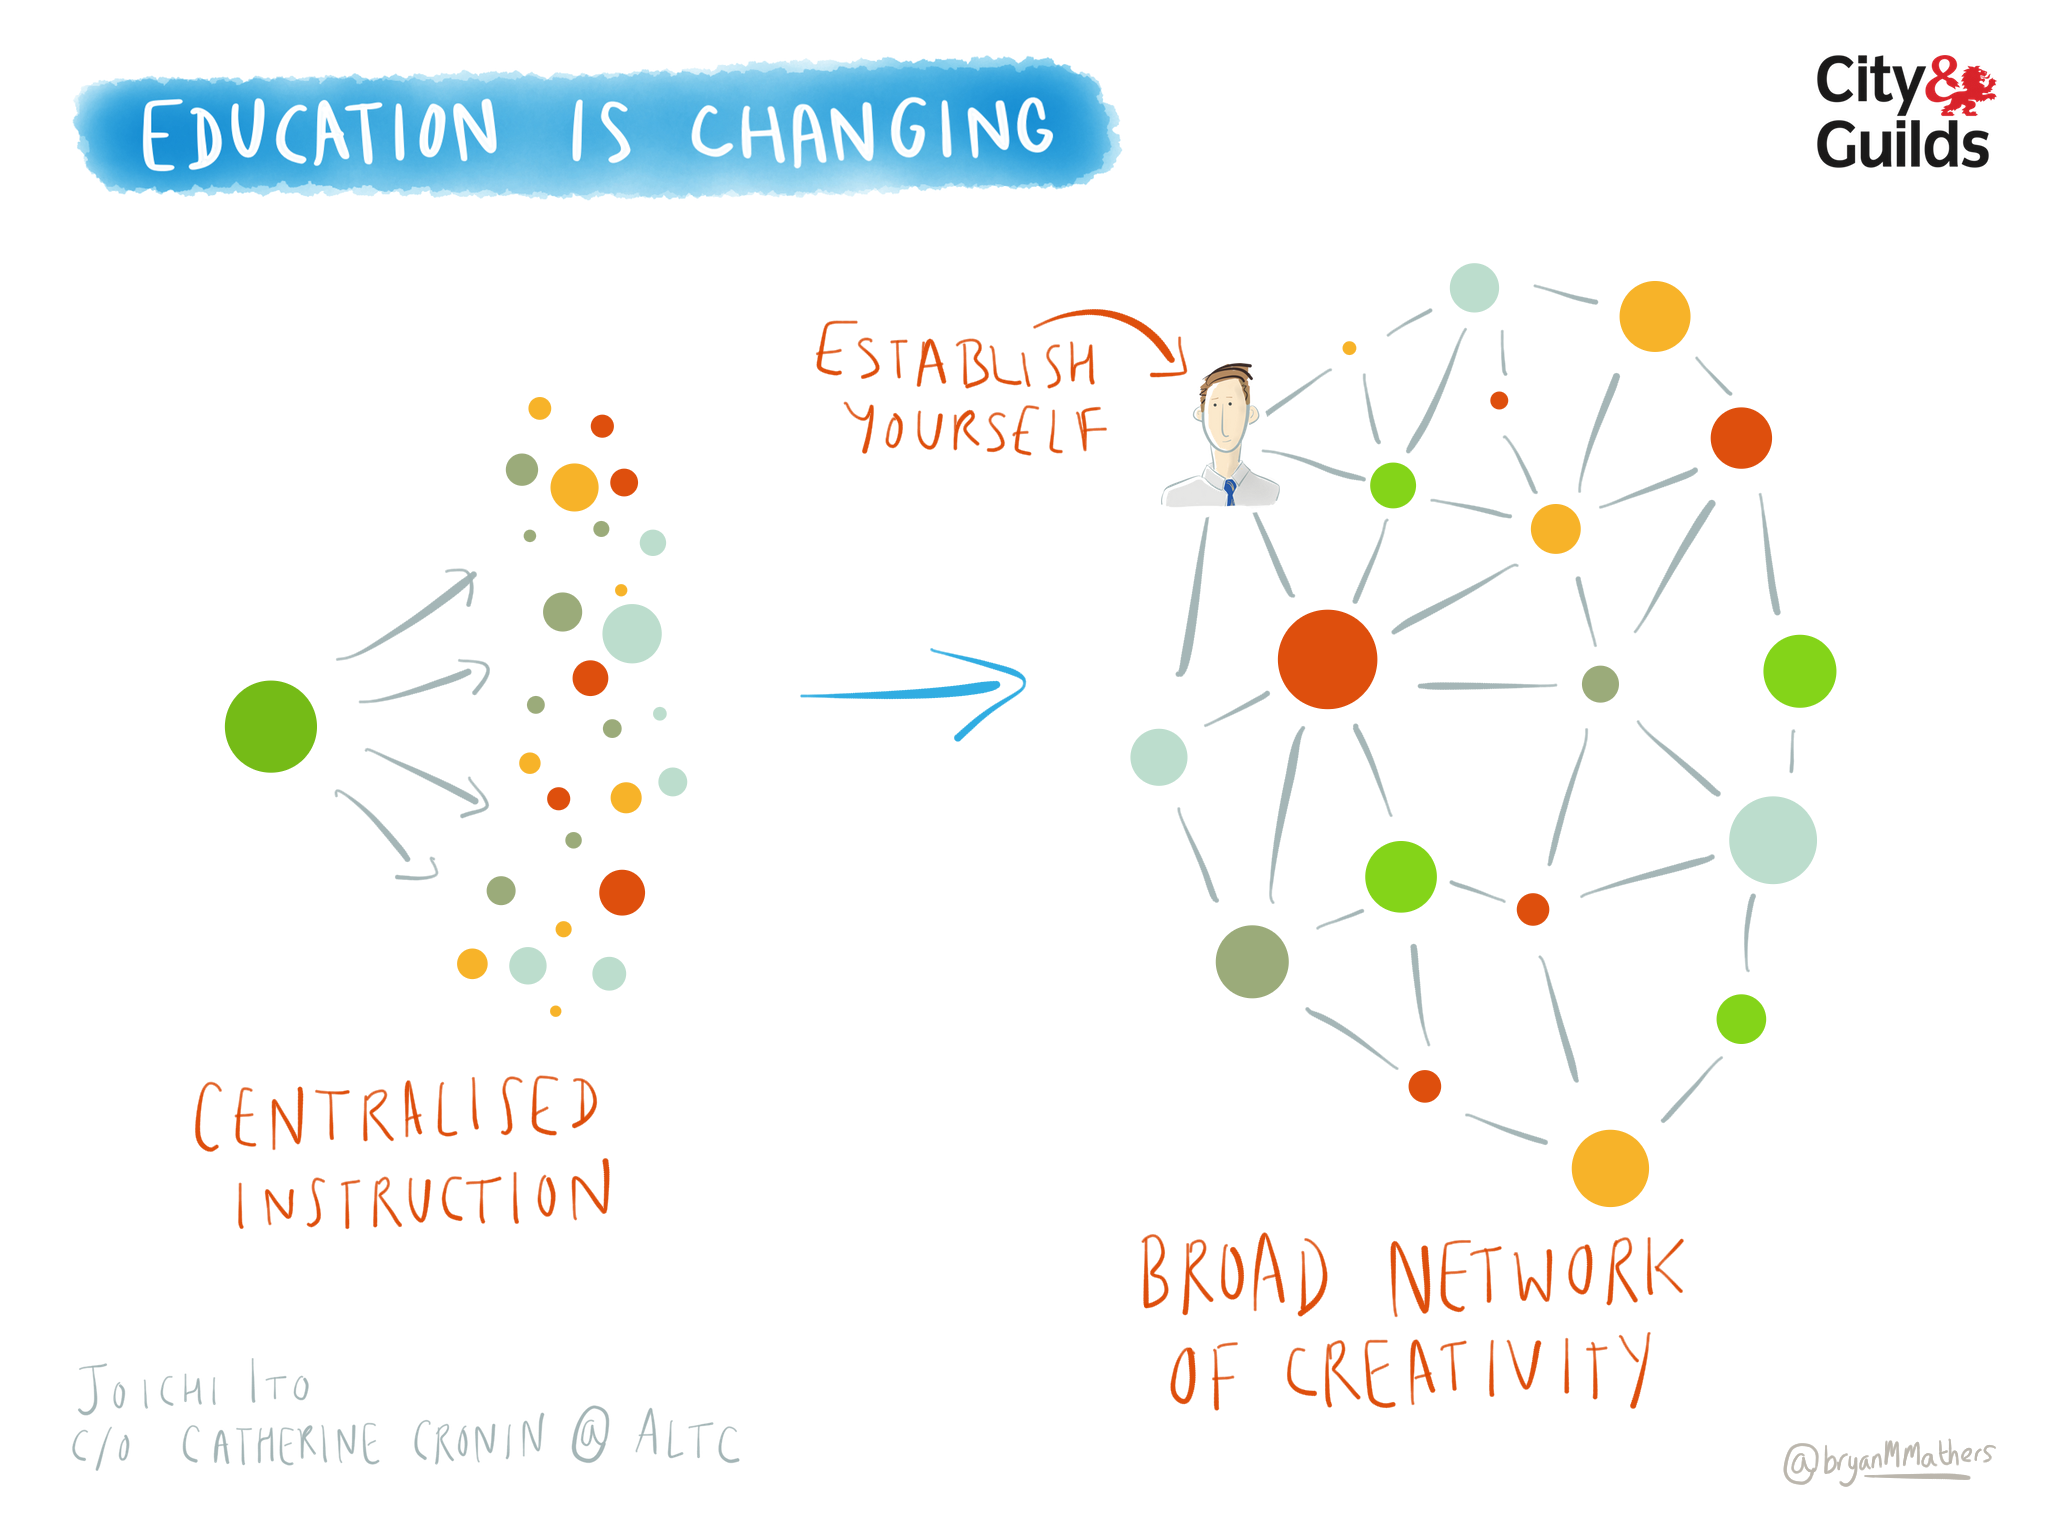 “Education is Changing” by Bryan Mathers (Flickr) is licensed under CC BY-ND 2.0